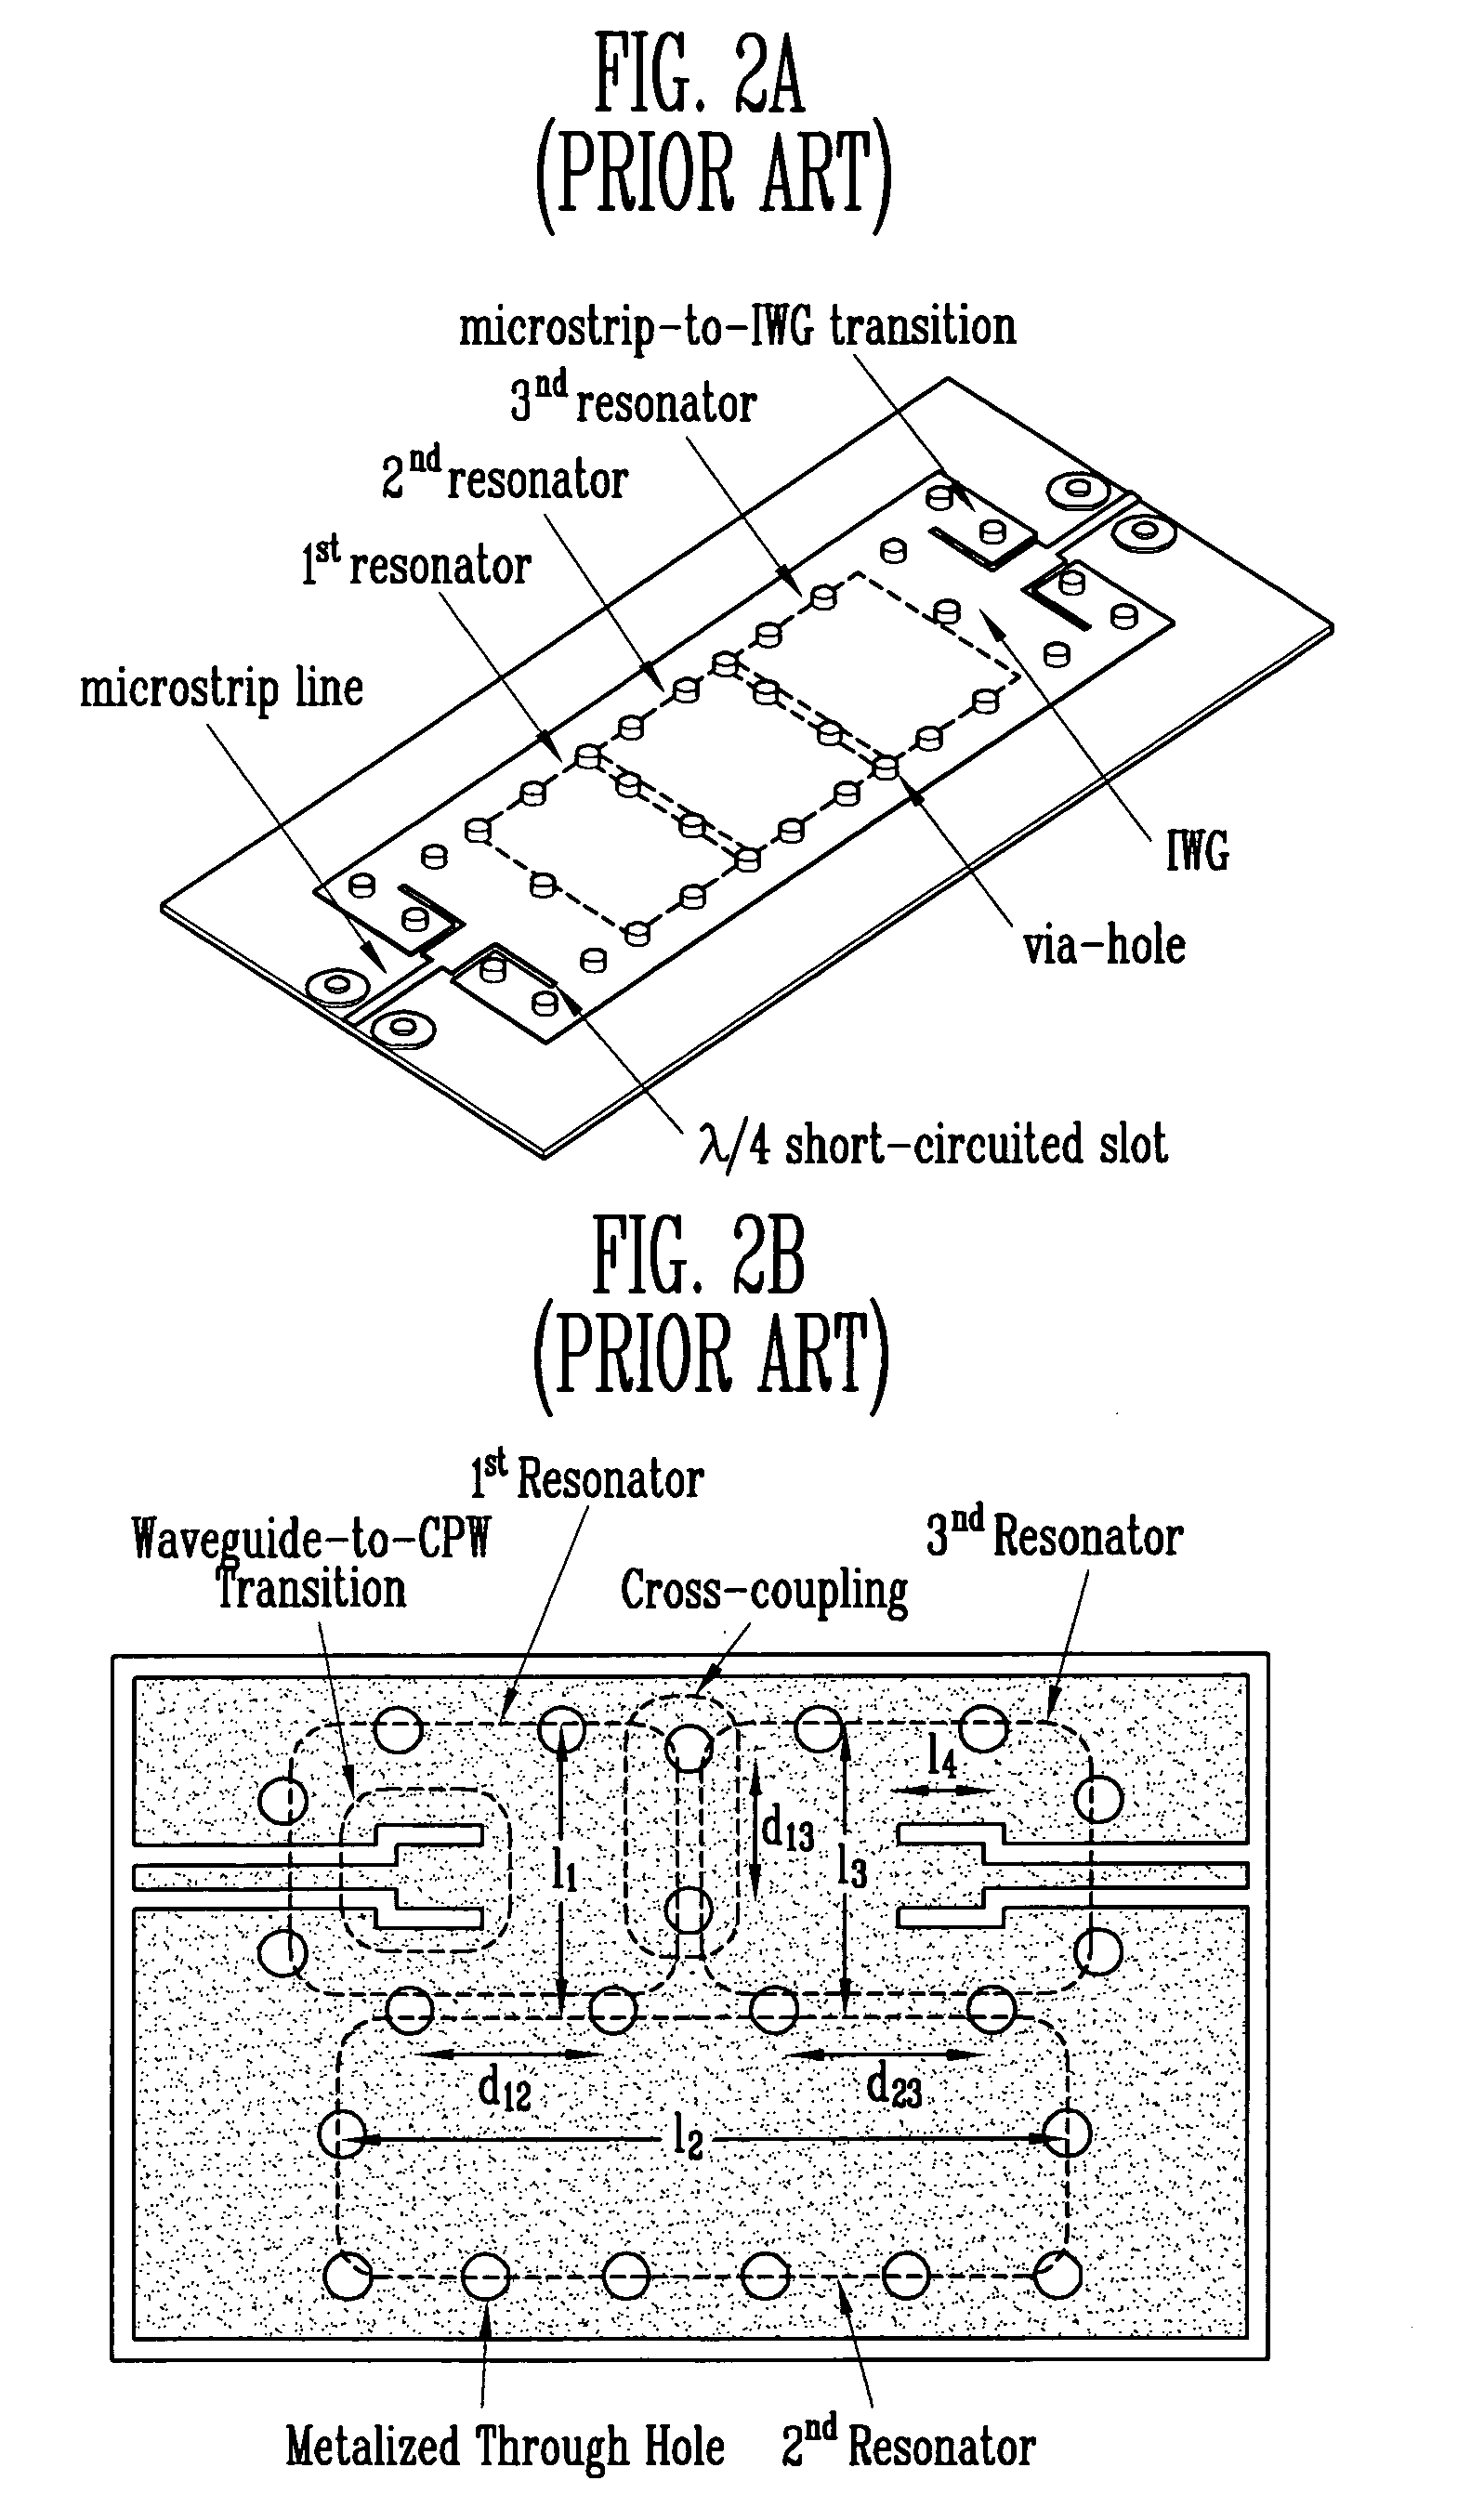 Dielectric waveguide filter with cross-coupling